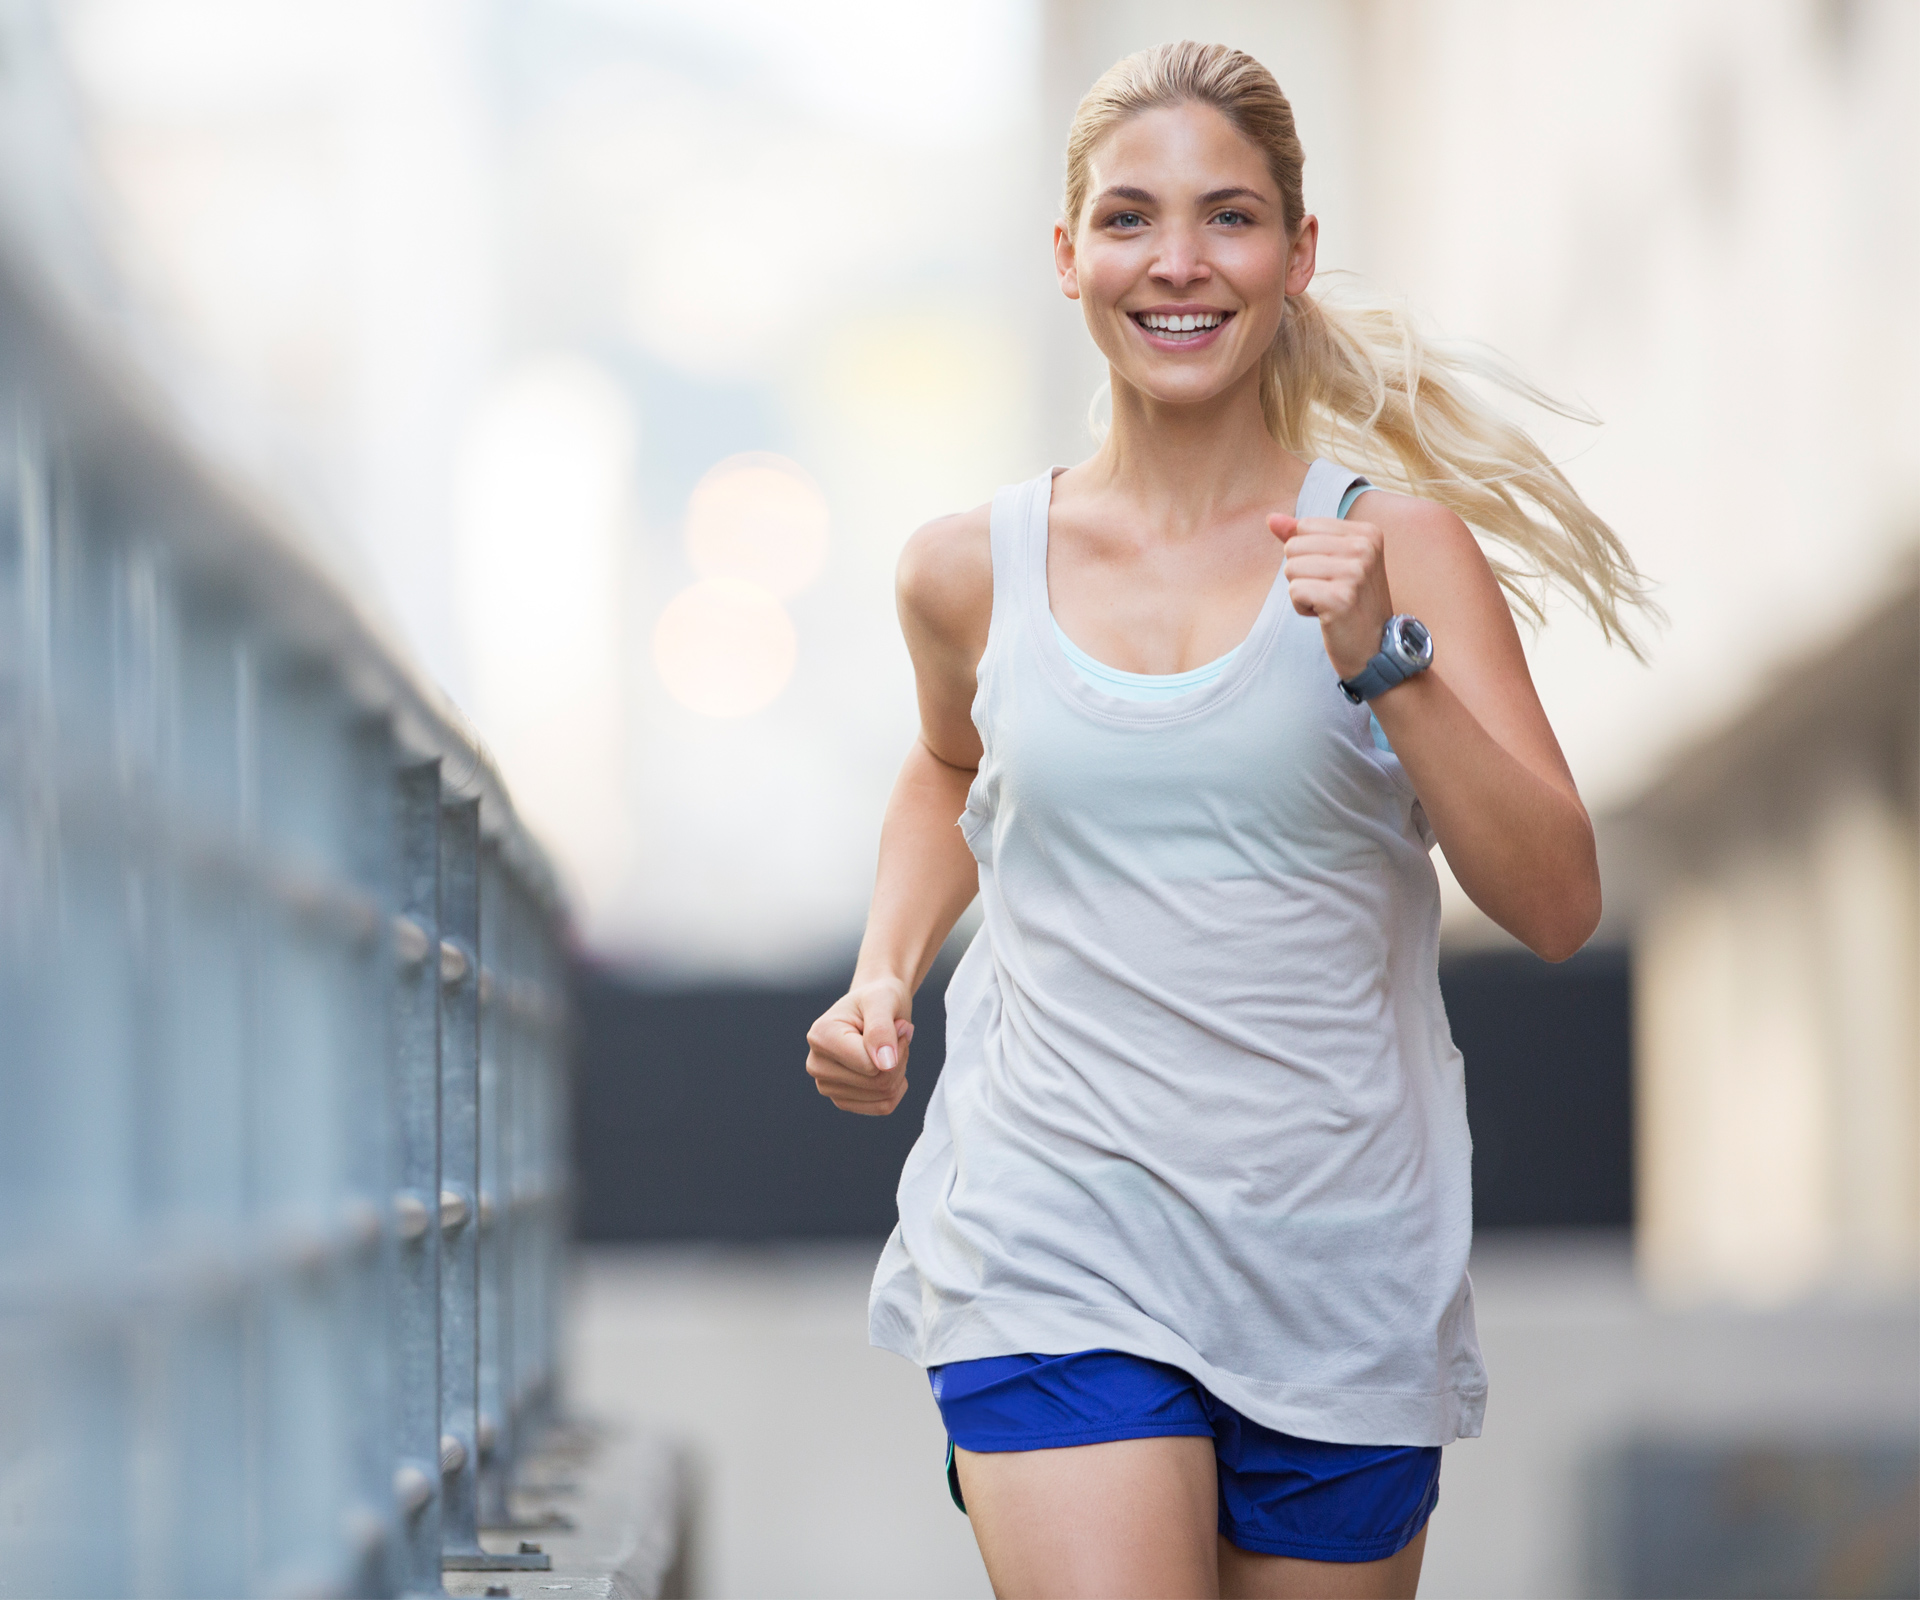 Scientists claim every hour of running adds seven hours to your life